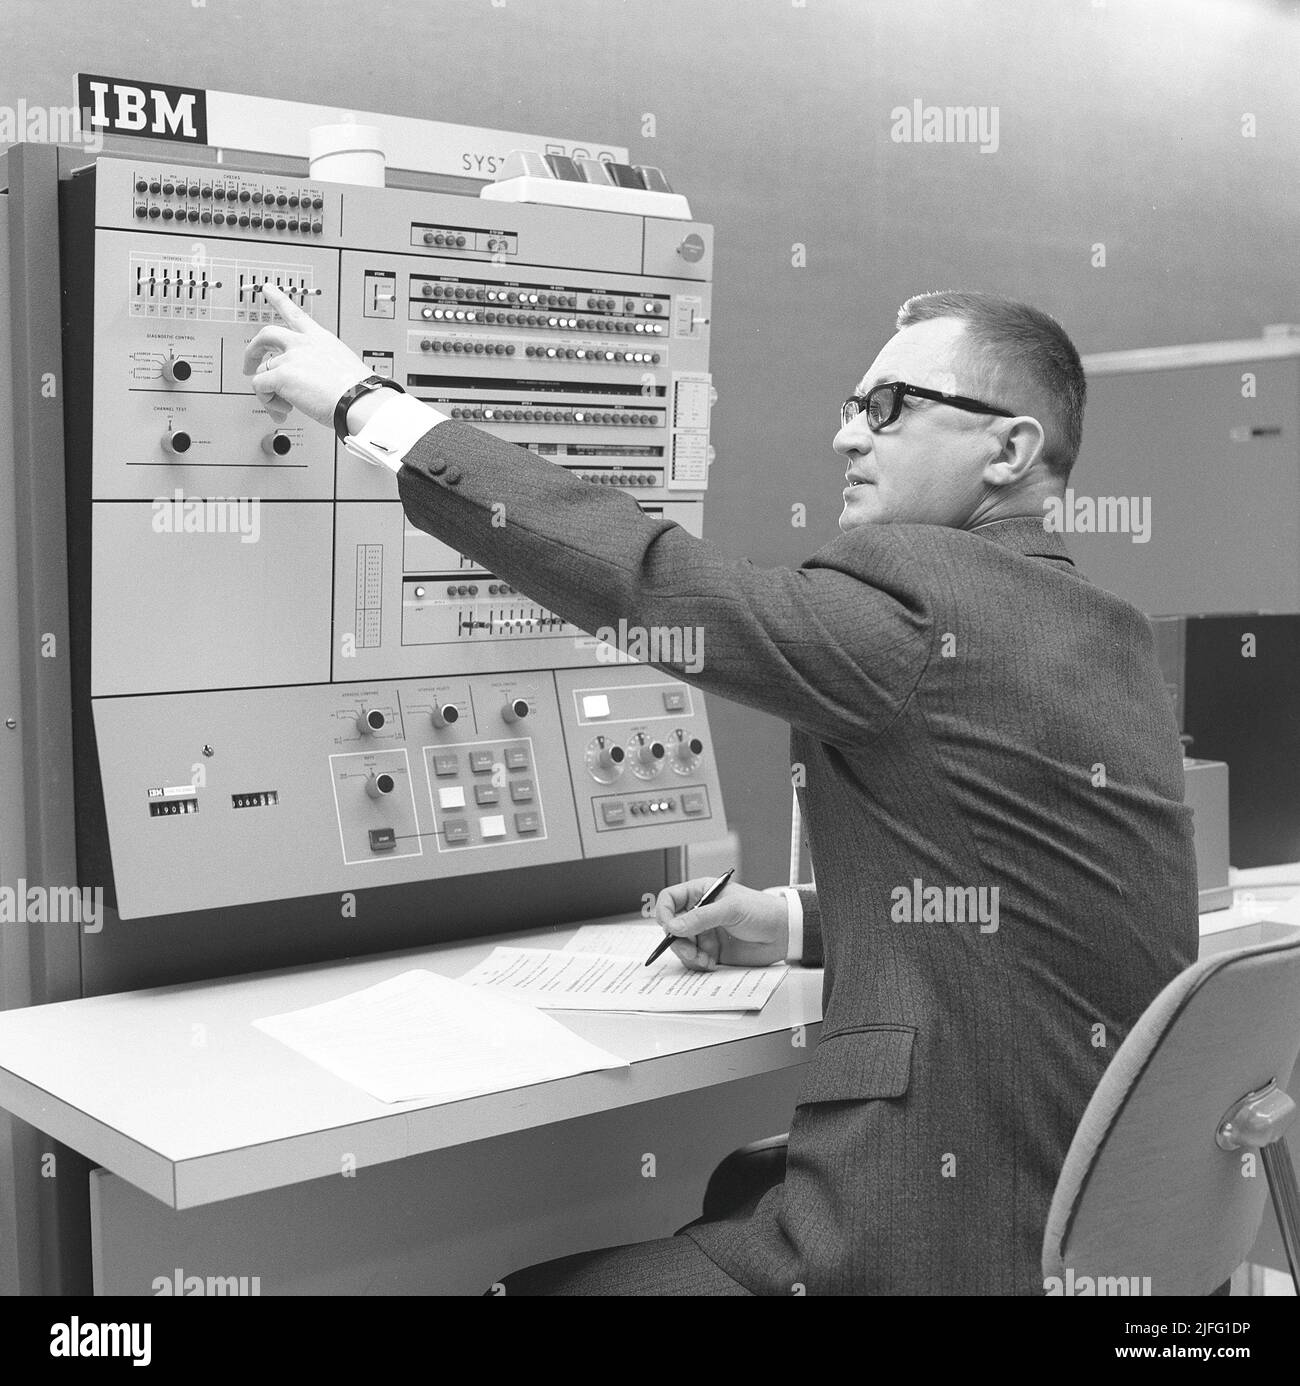 In the 1960s. Interior of a room with computers and people on the job of handling them and register and reading information. A sign above the mainframe computer says IBM 360. IBM system 360 was frequently seen in the american television-series Mad Men.  Picture taken 1965 Kristoffersson ref DY125-1 Stock Photo